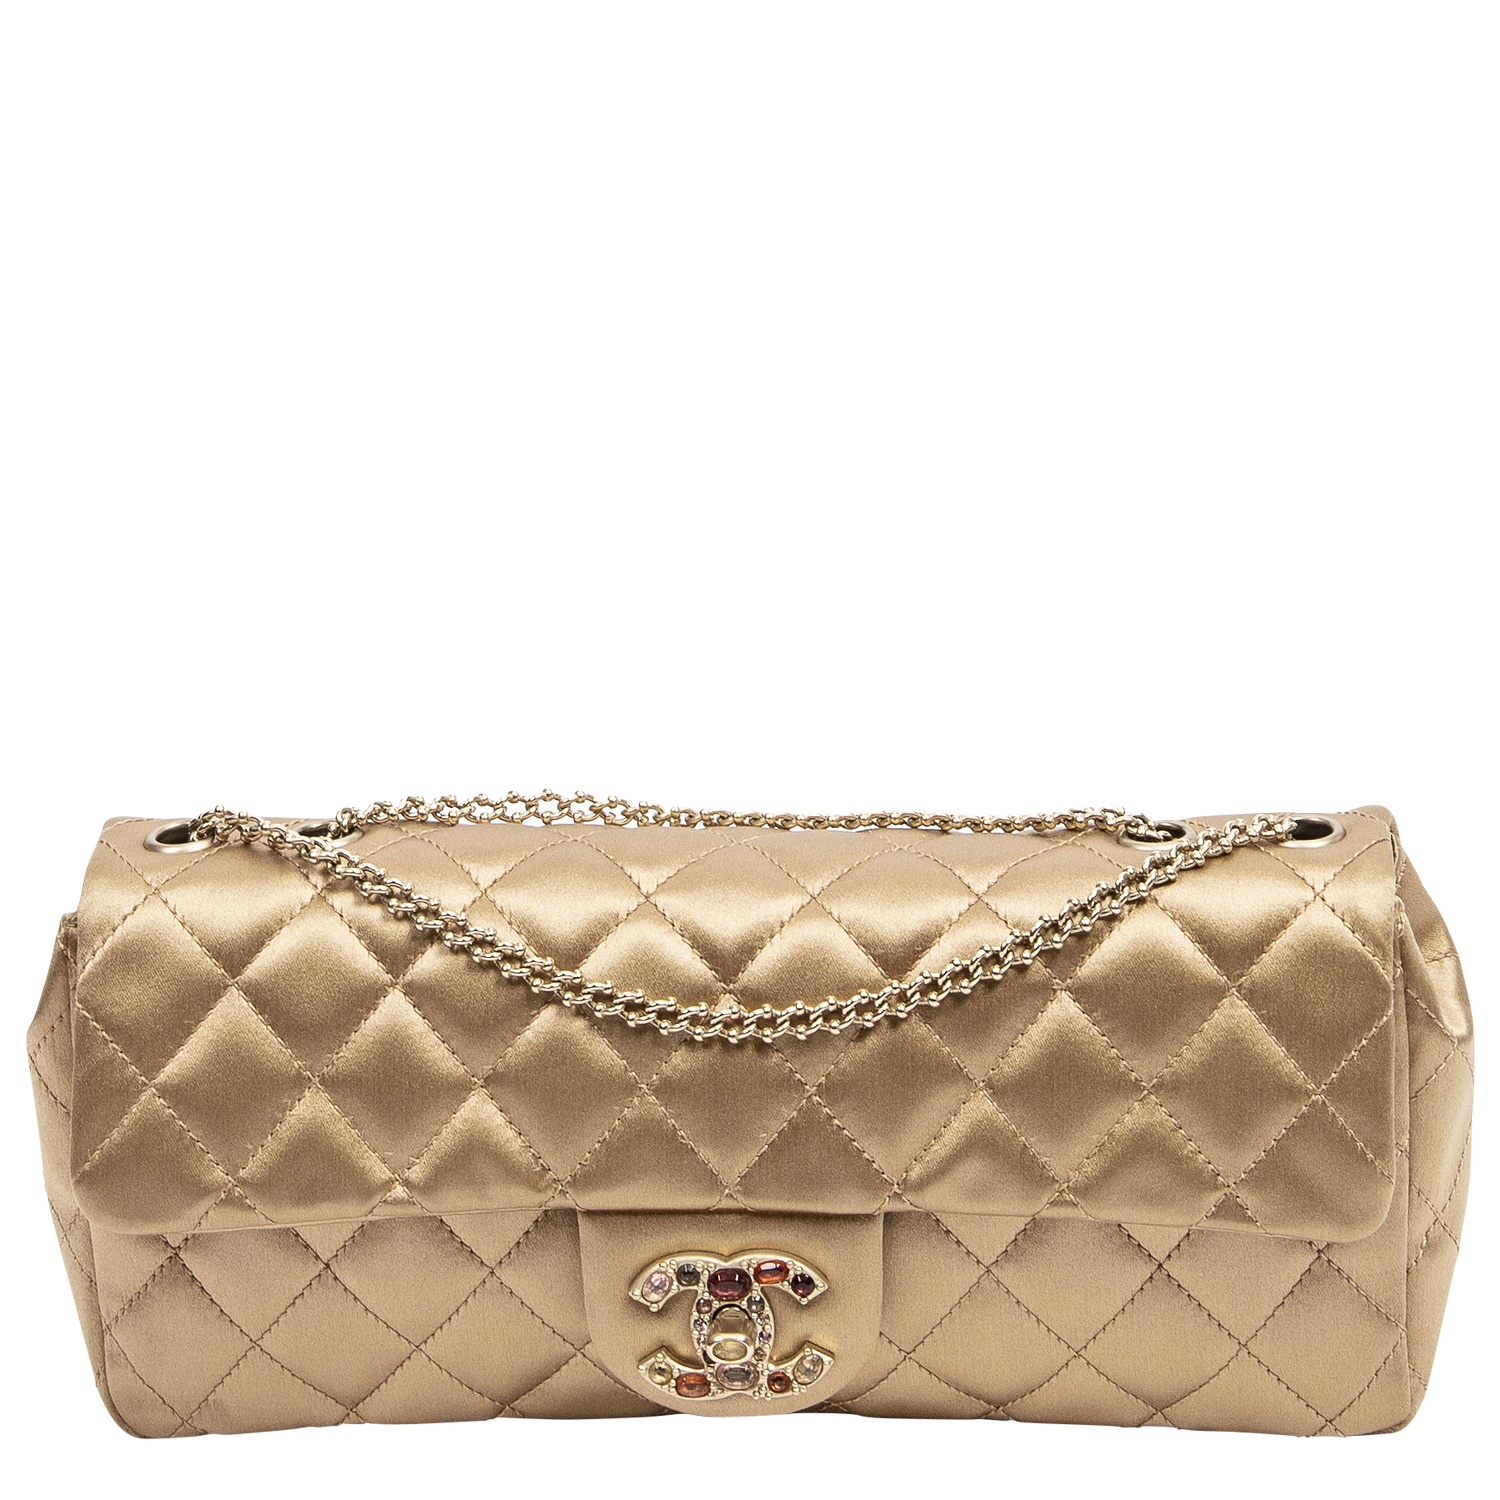 Chanel 2008 Limited Edition Gold Jewel East West Flap Bag